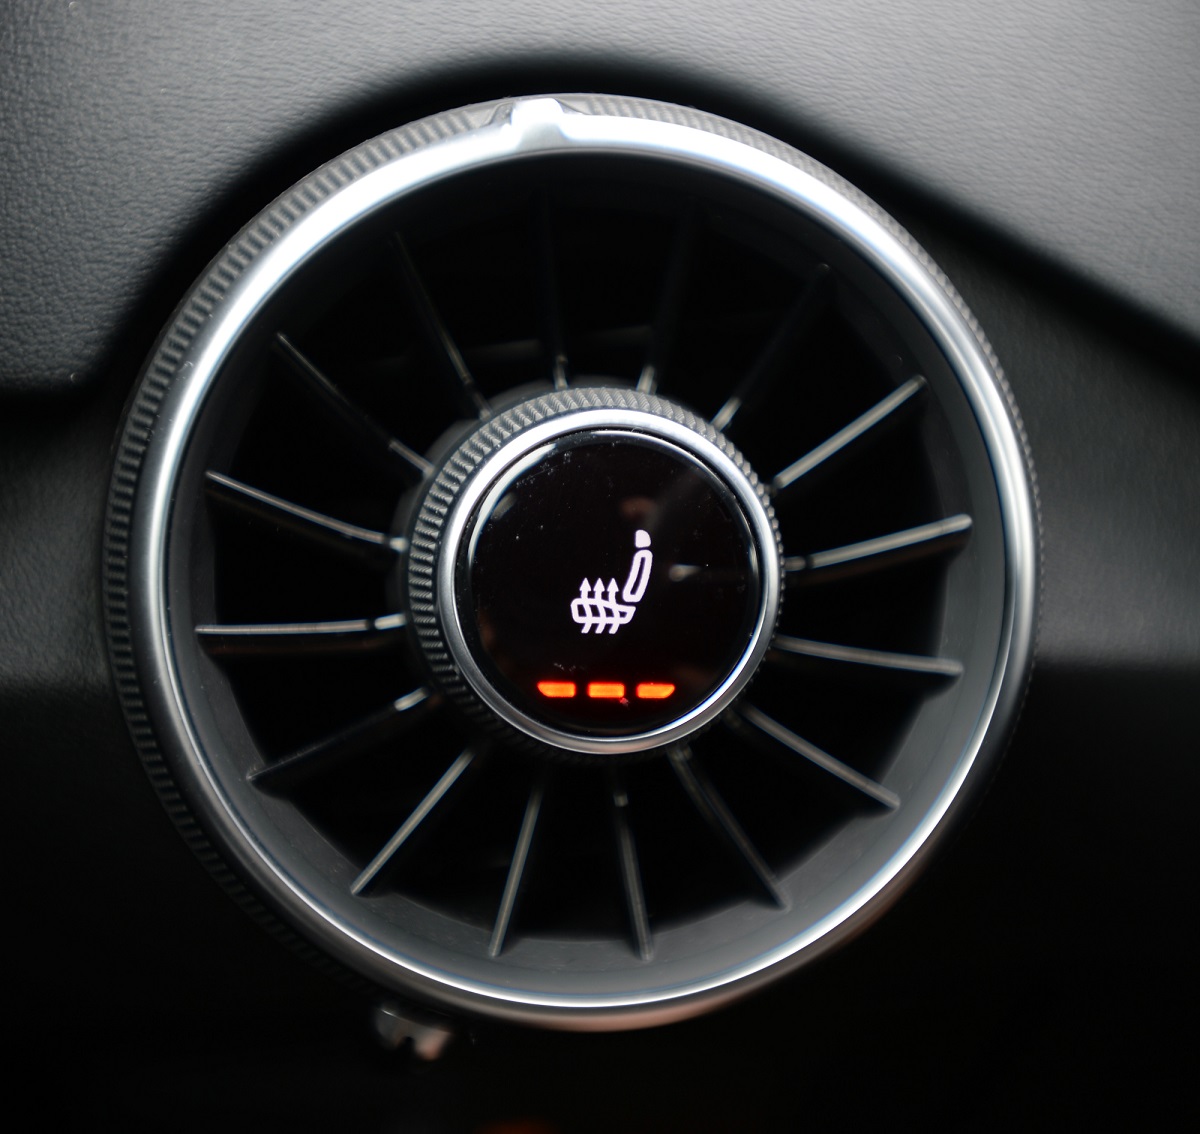 A dialed car seat heater control is shown on max setting.